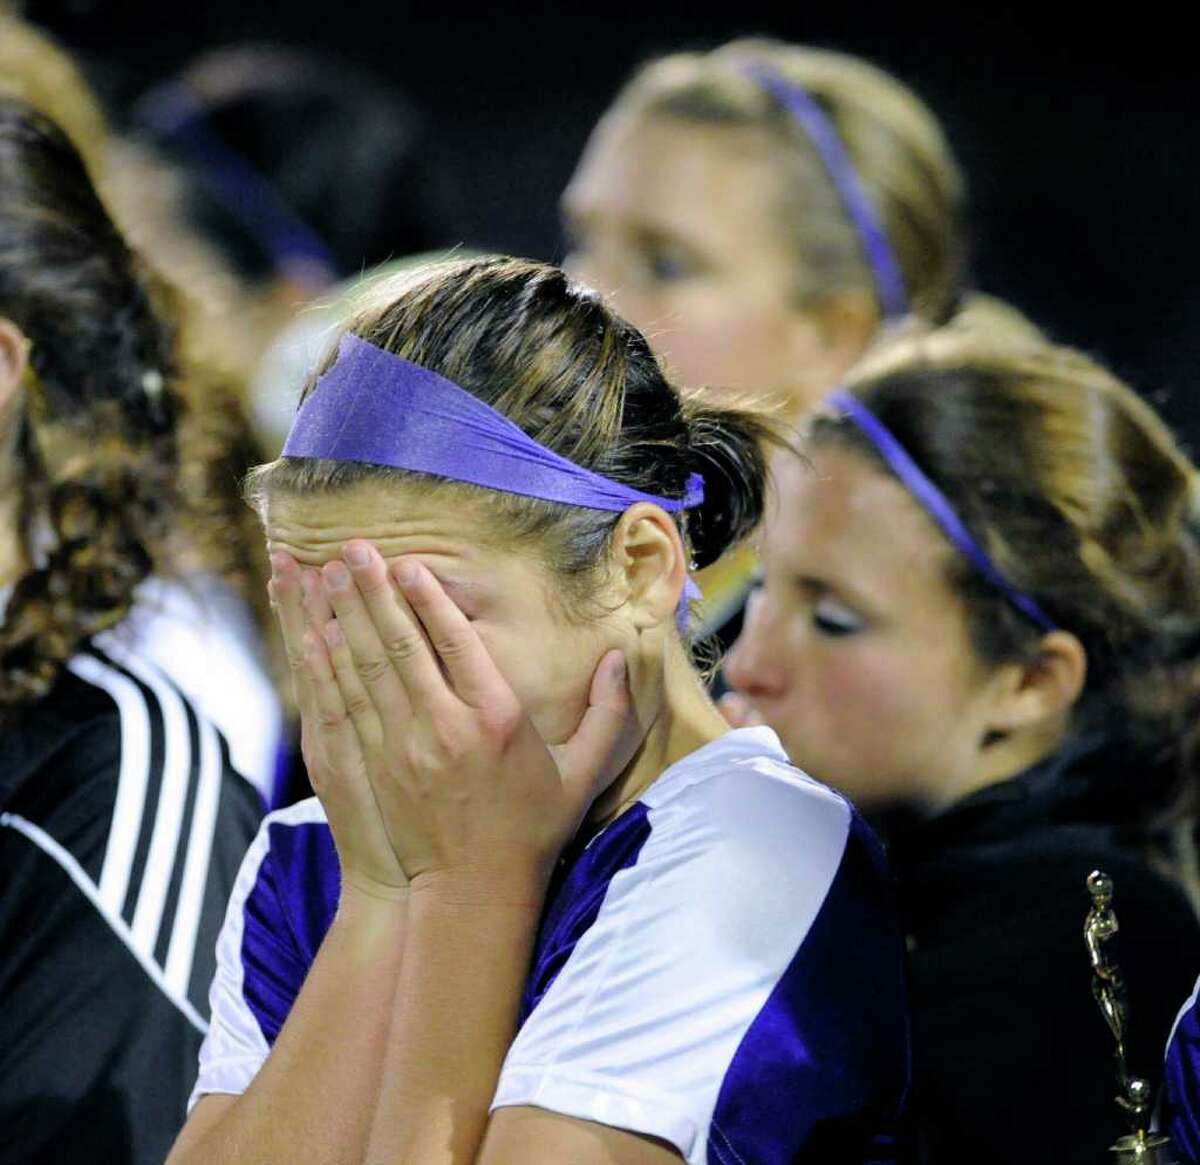 A Westhill player buries her head in her hands during the 2010 Girls FCIAC Soccer Championship between Greenwich High School vs. Westhill High School at Norwalk High School, Wednesday night, Nov. 3, 2010. Greenwich defeated Westhill, 1-0.